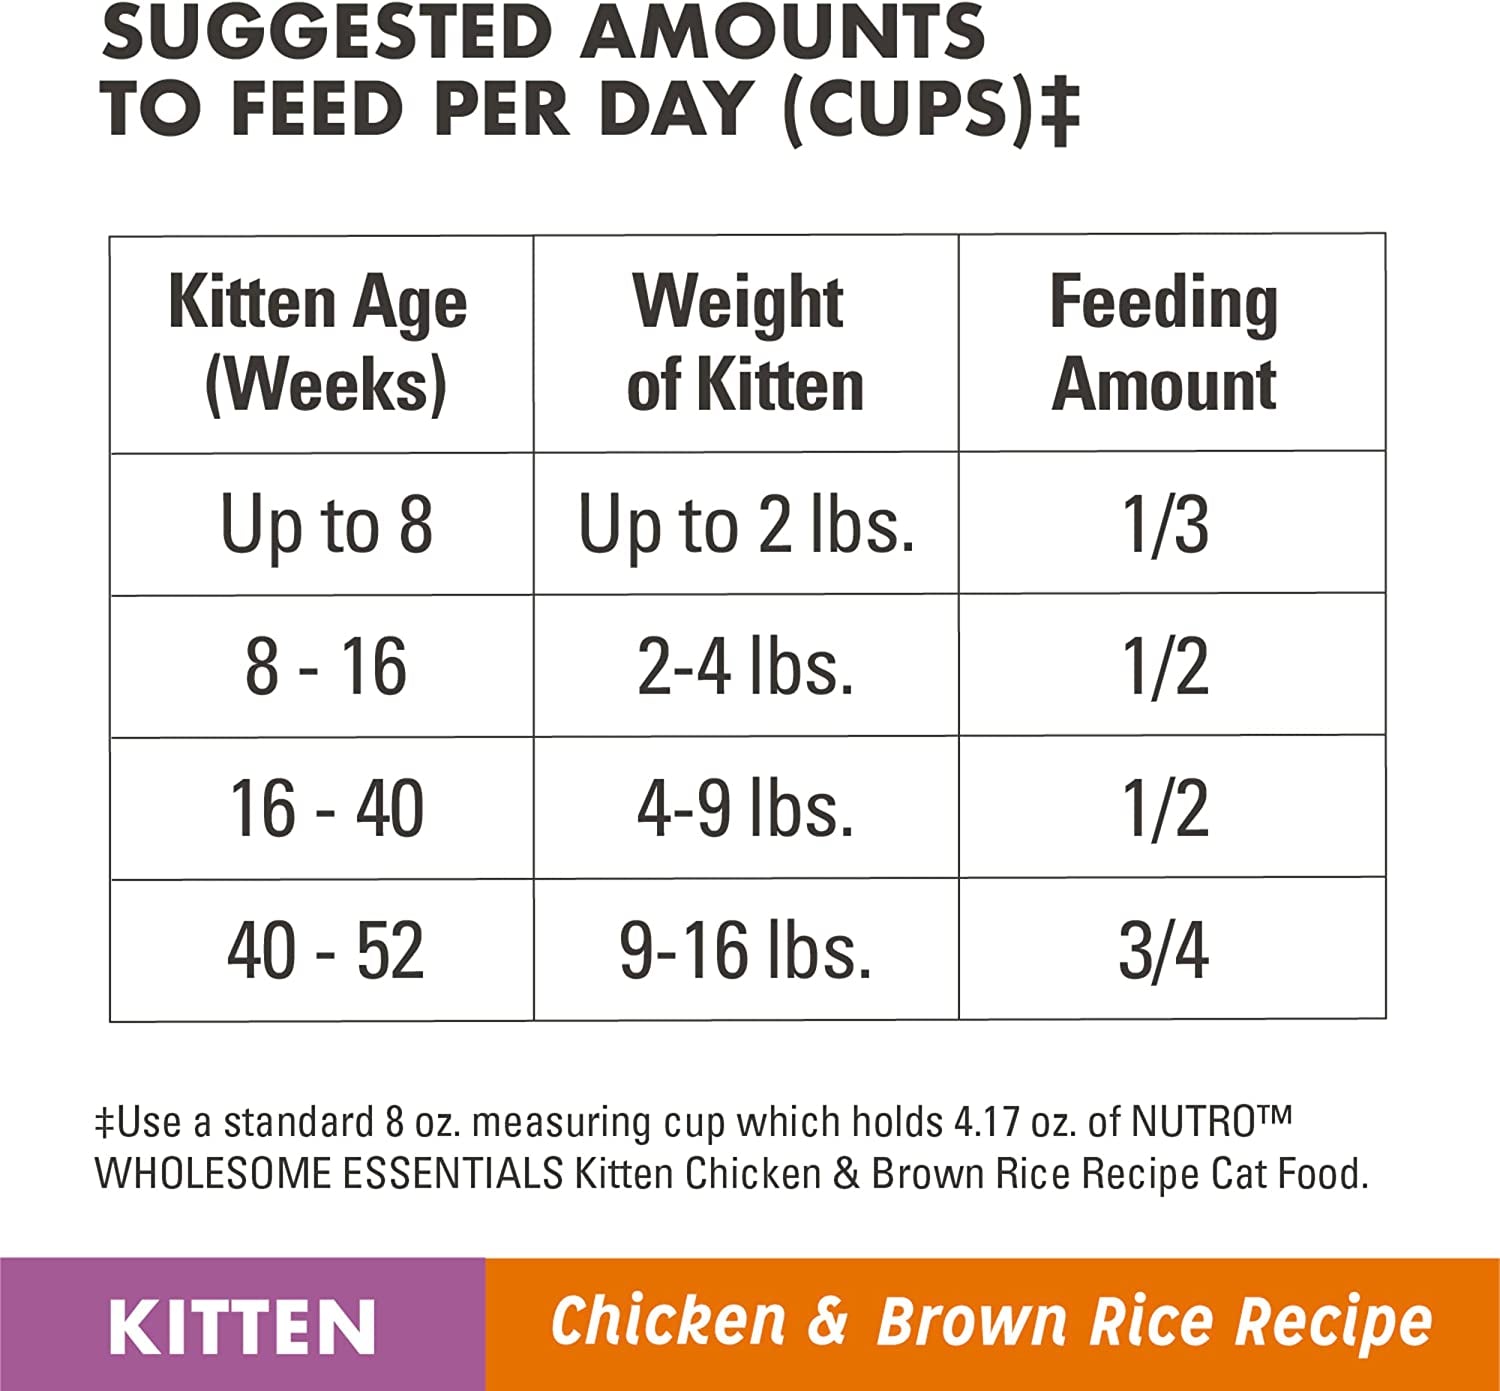 NUTRO WHOLESOME ESSENTIALS Natural Dry Cat Food, Kitten Chicken & Brown Rice Recipe Cat Kibble, 5 Lb. Bag